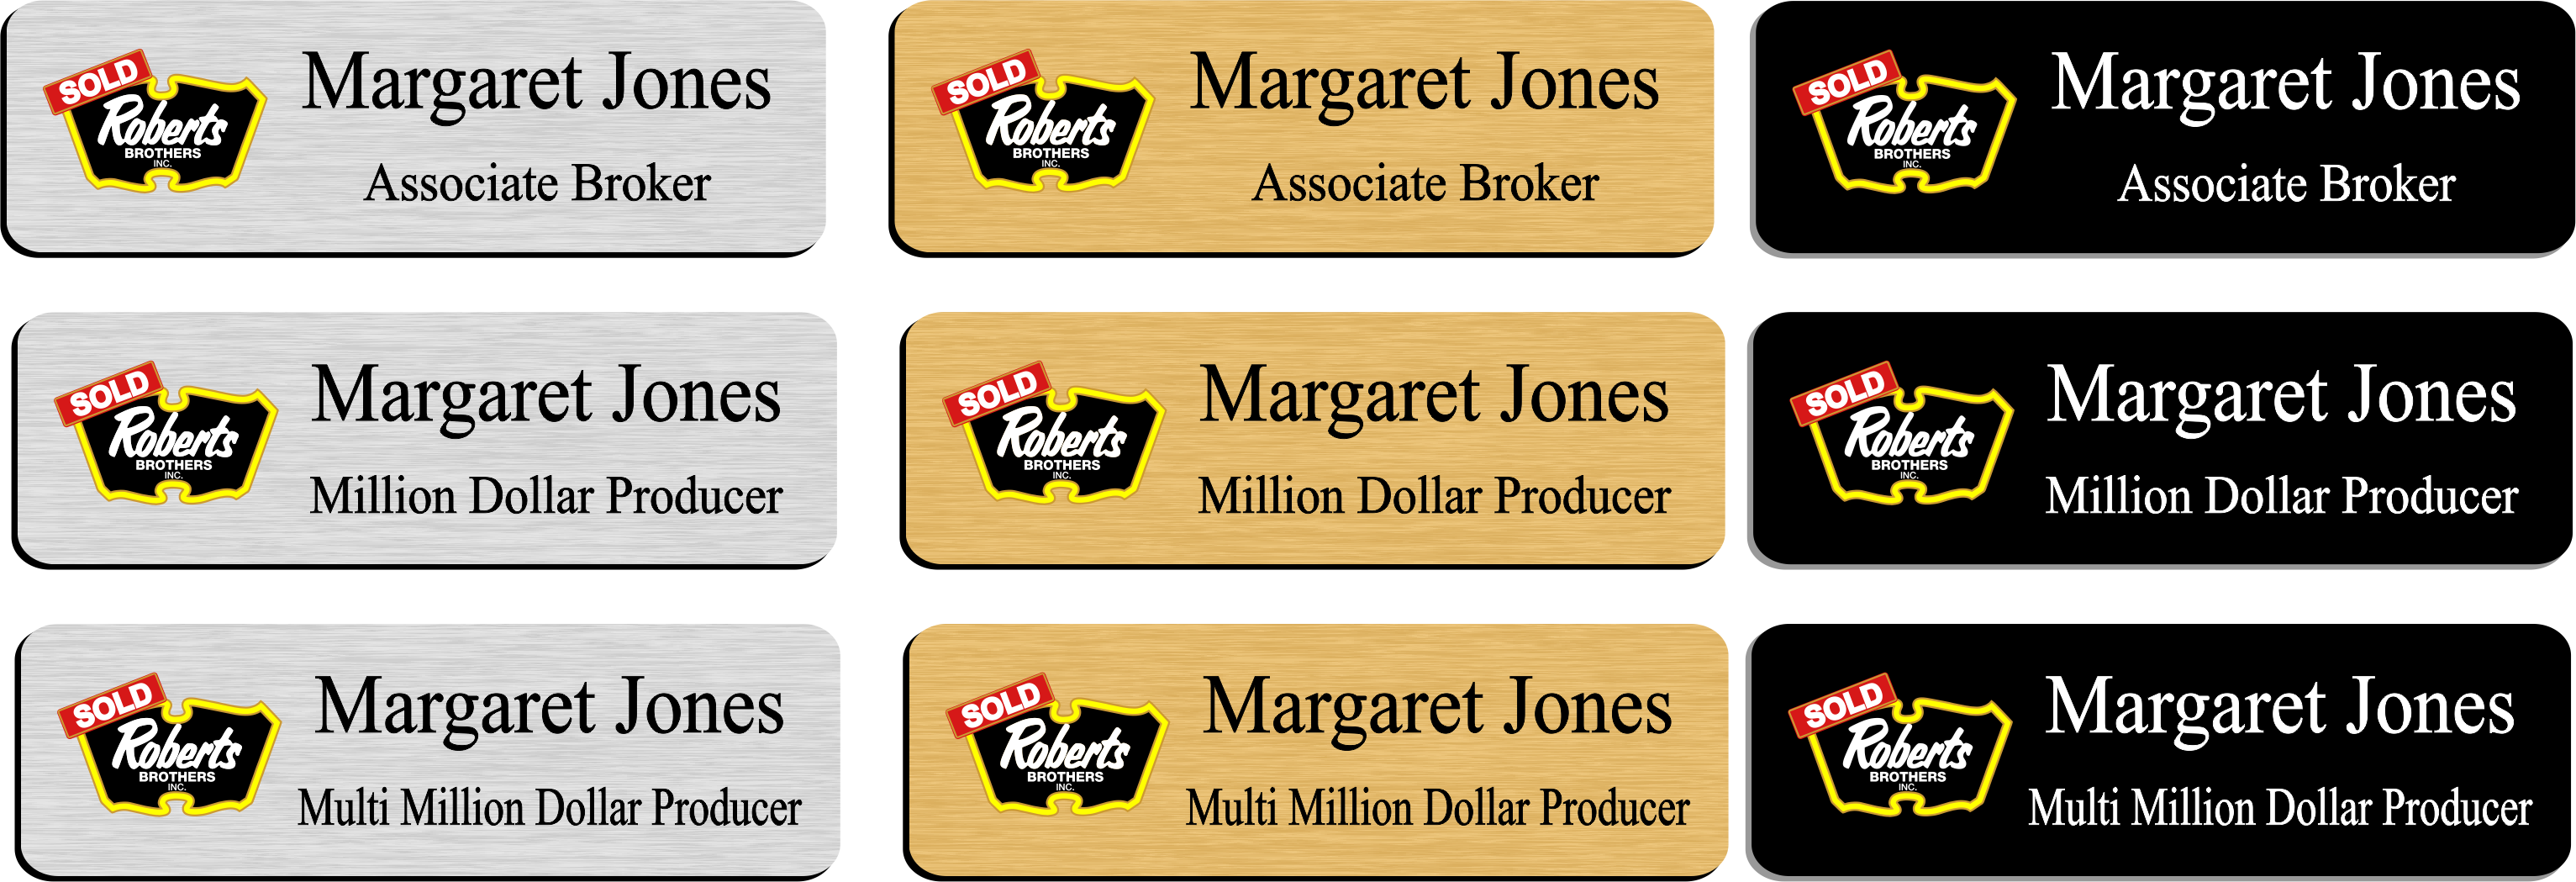 Roberts Brothers Name Badges